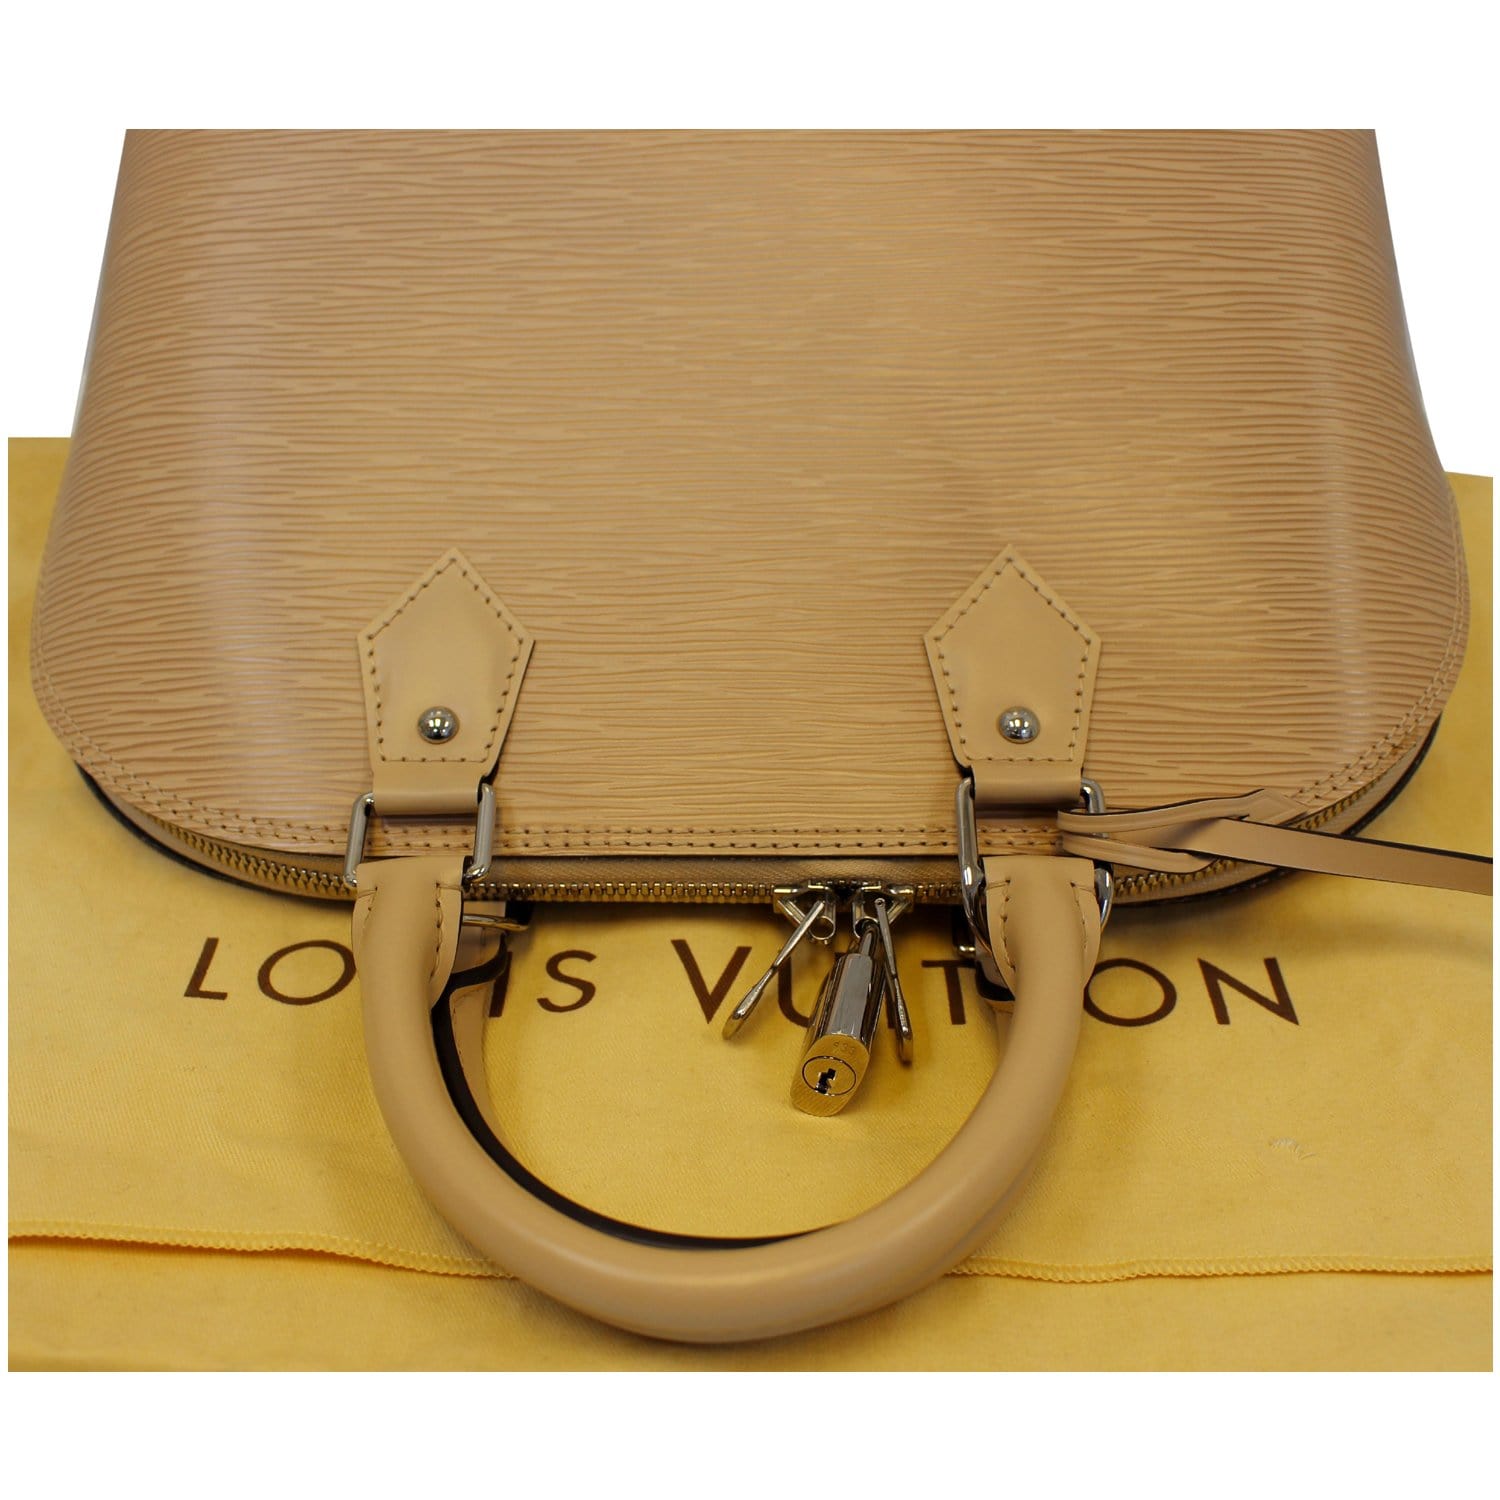 Authentic Louis Vuitton Ivory Vernis Leather sherwood GM Shoulder